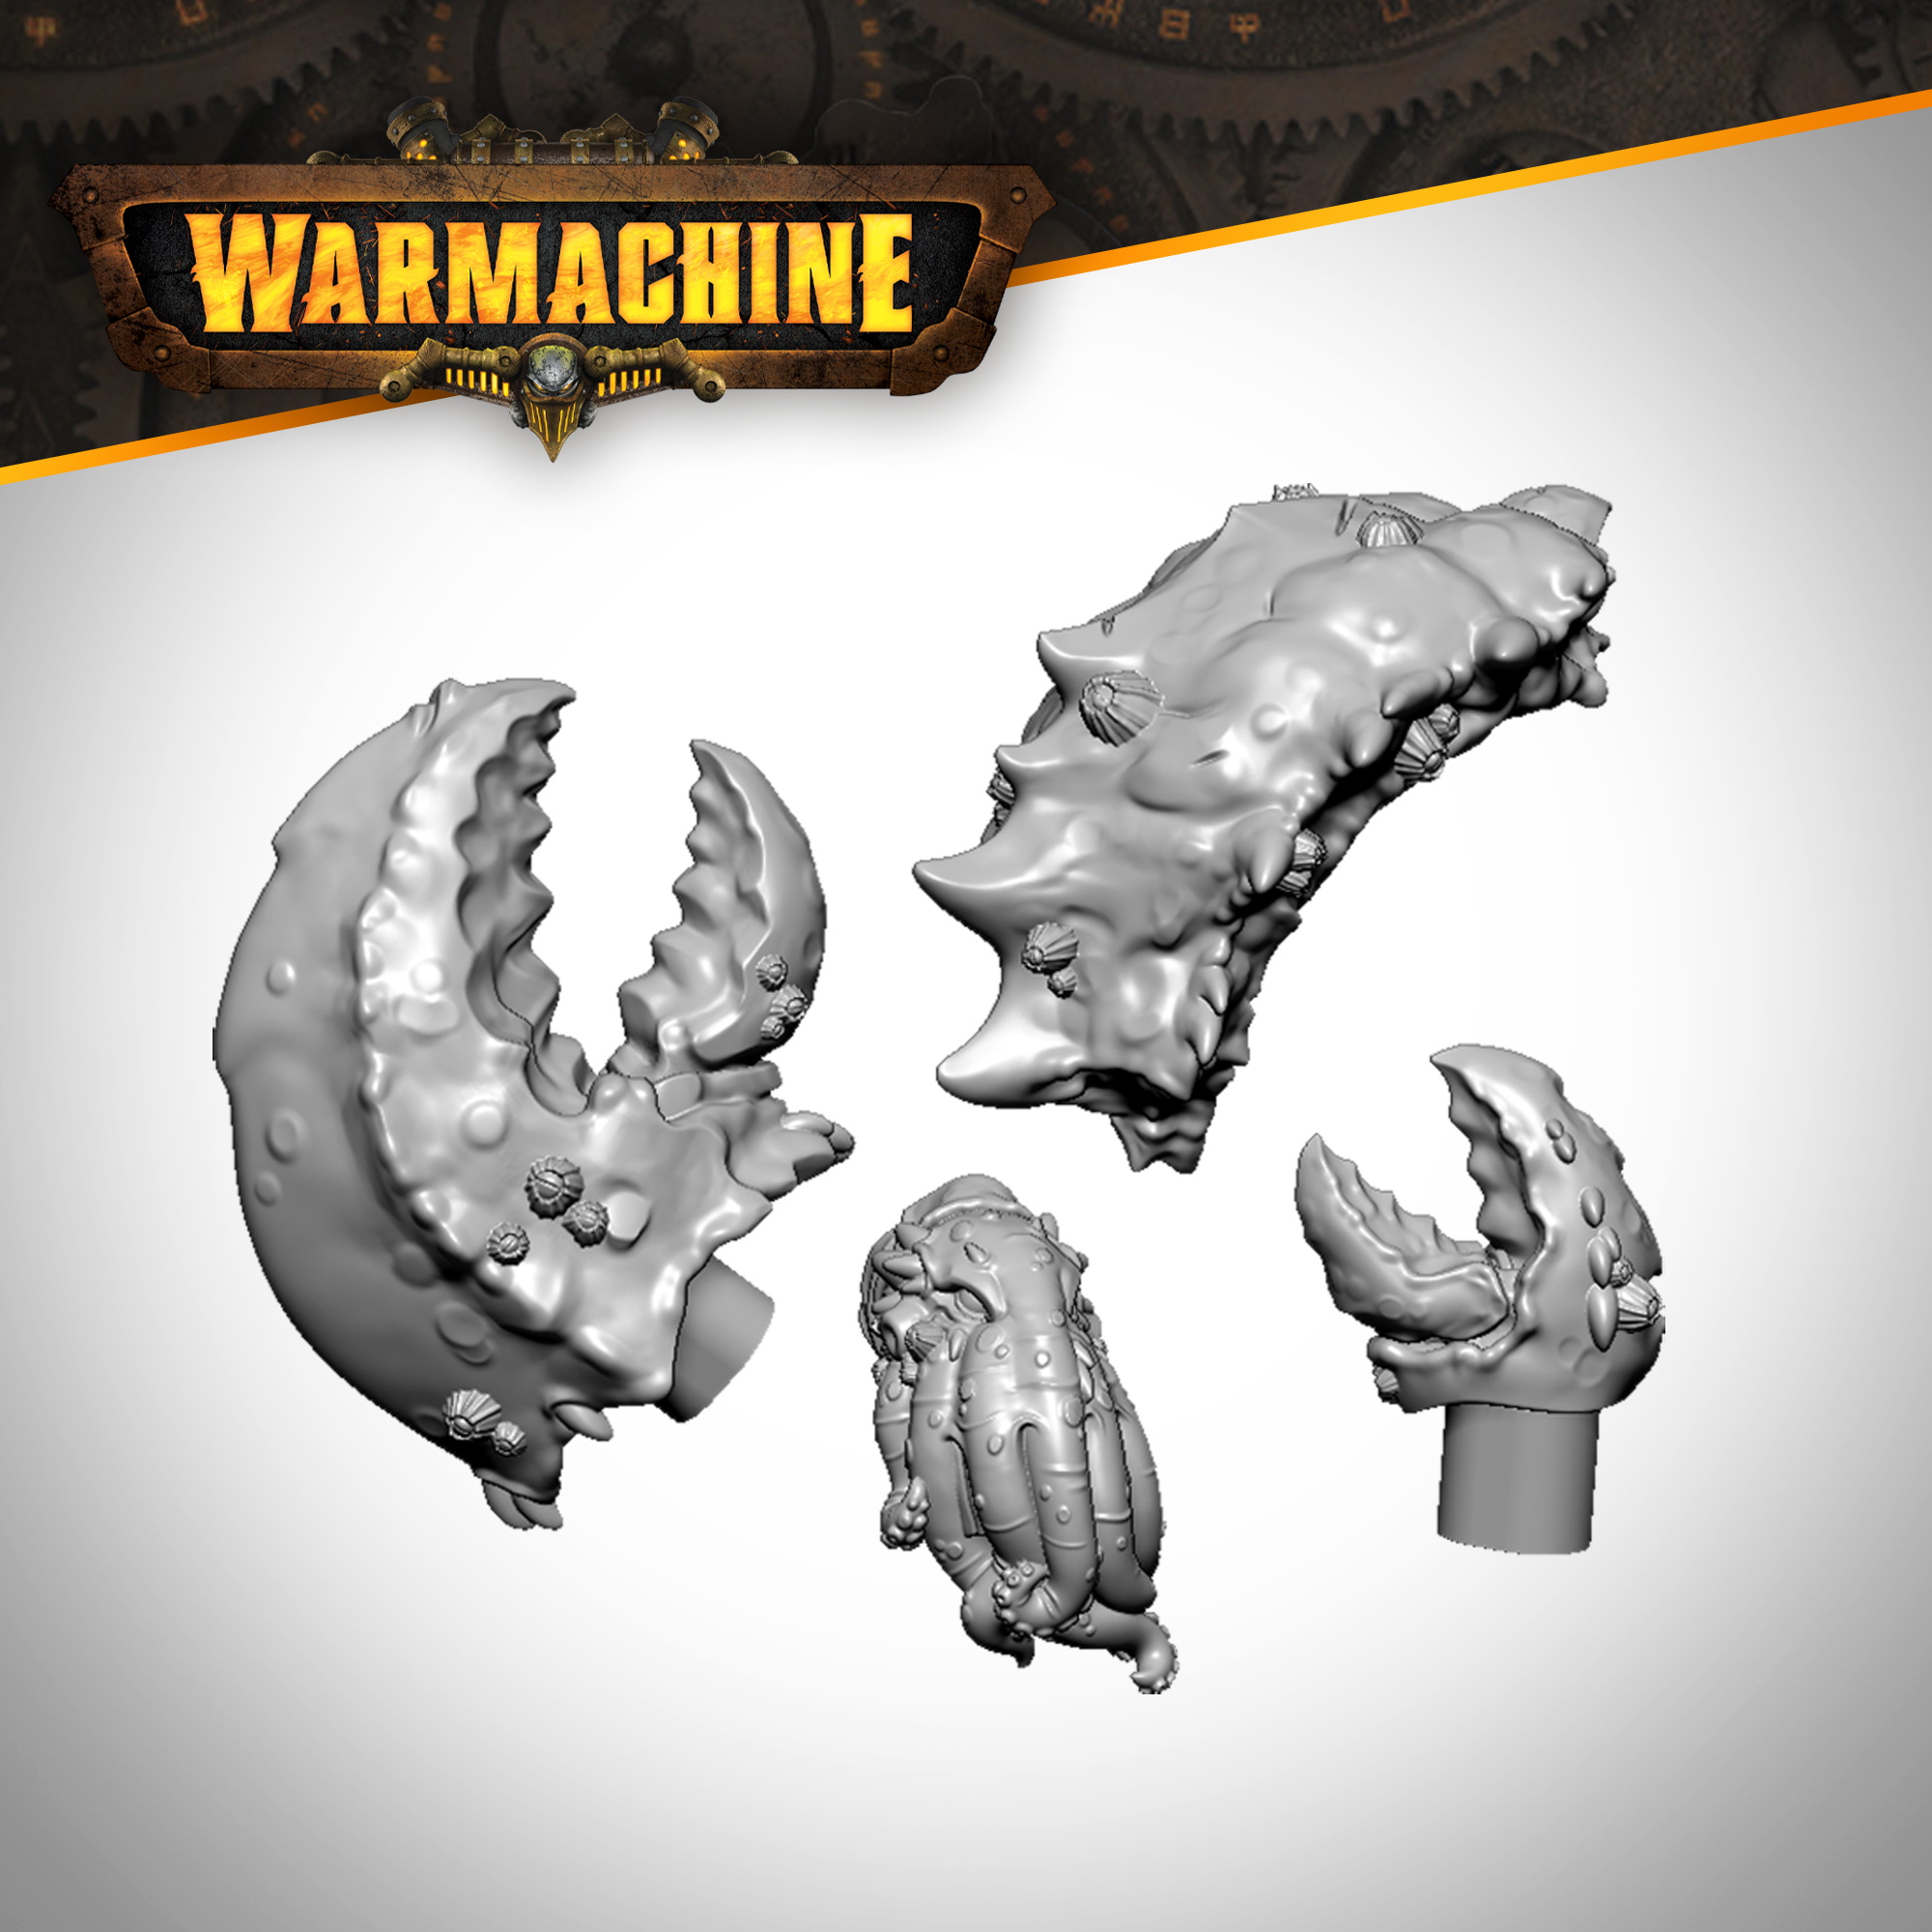 Warmachine: The Great Old One